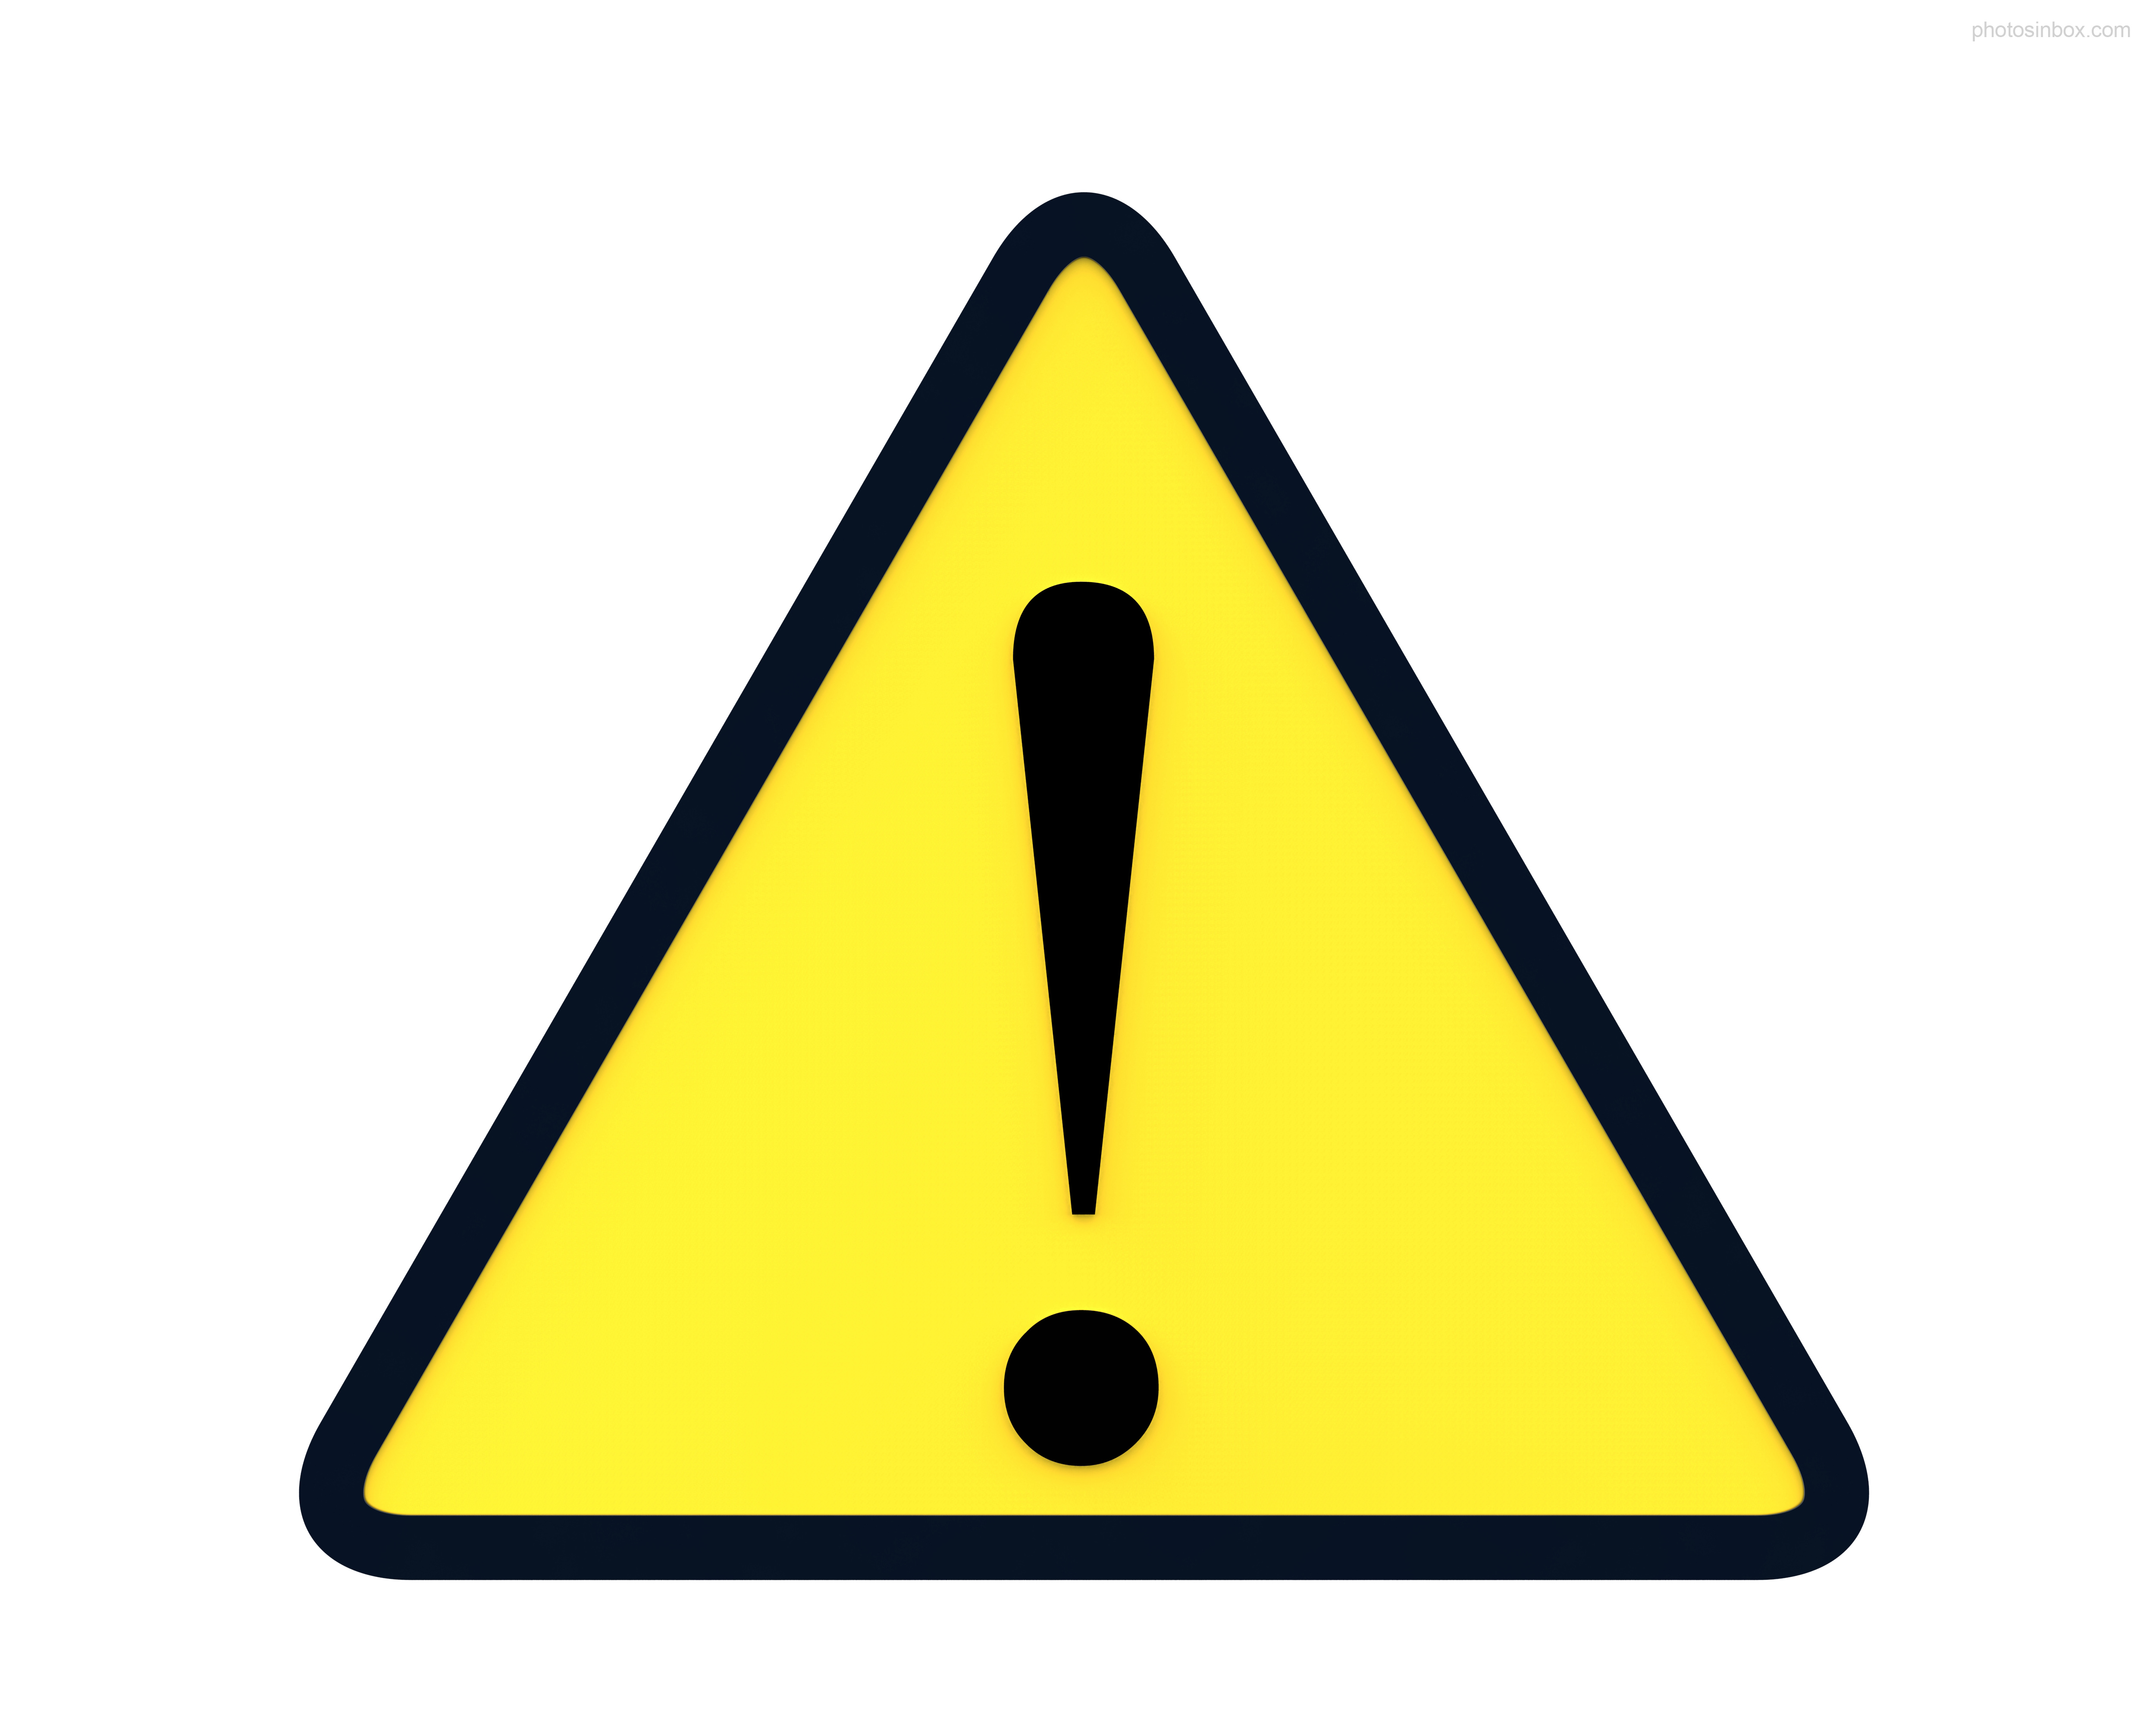 Nuclear Warning Sign Symbol - ClipArt Best